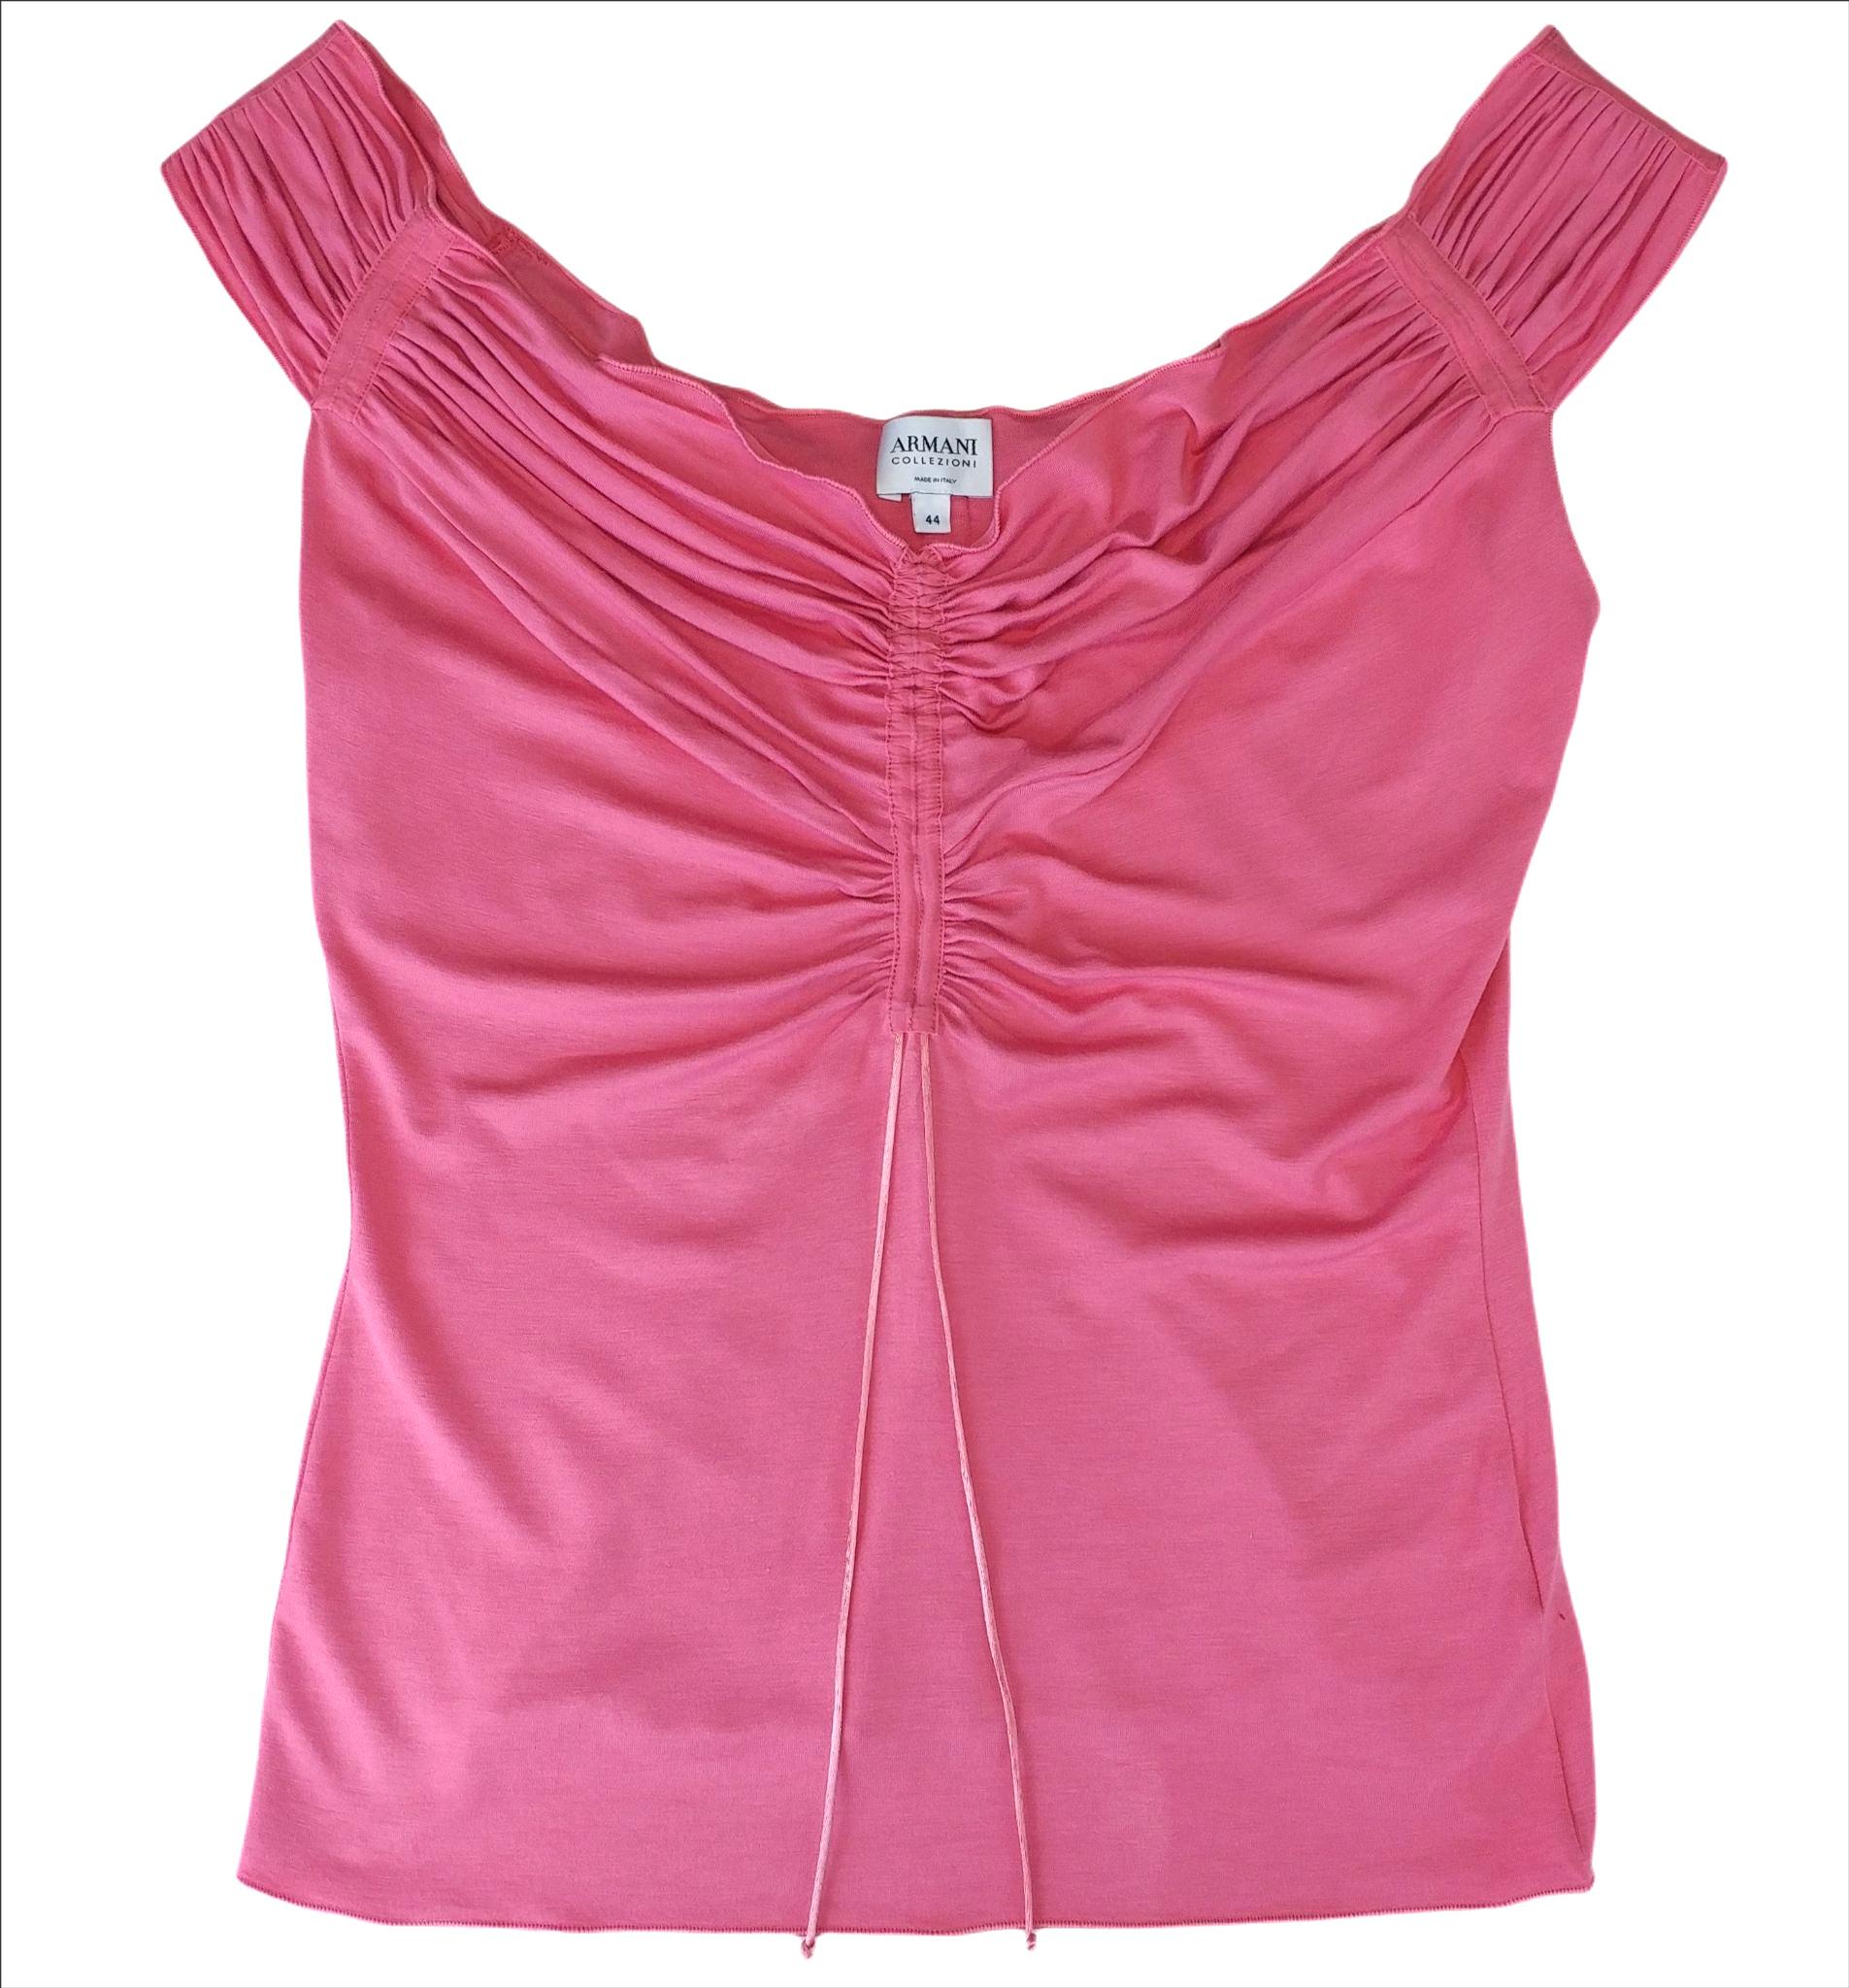 ARMANI – Sleeveless Pink Tank Top with Off-Shoulder Neckline Size 8US ...